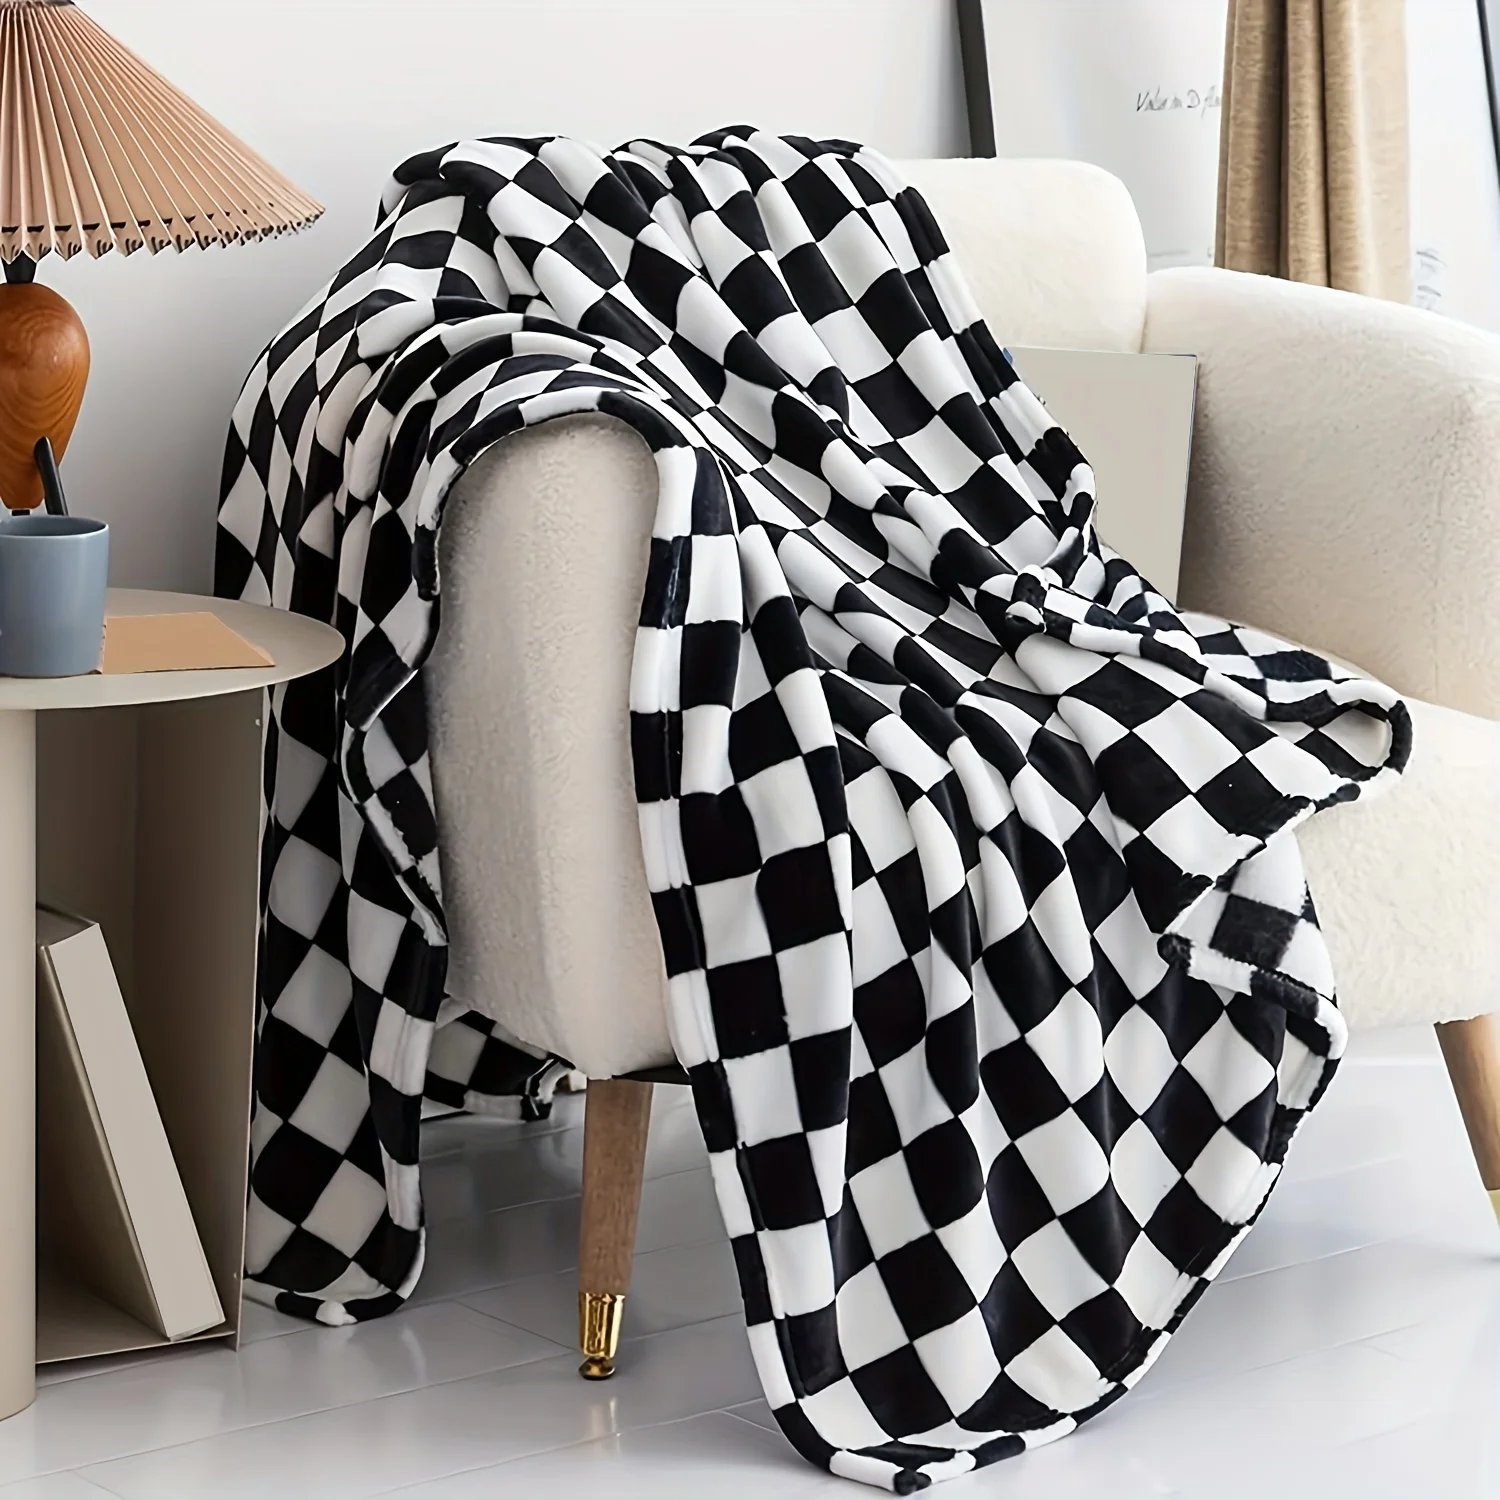 

Checkered Flannel Blanket Digital Printing Flannel Blanket Fluffy Microfiber Solid Blankets For Bed Couch Sofa Camping Office